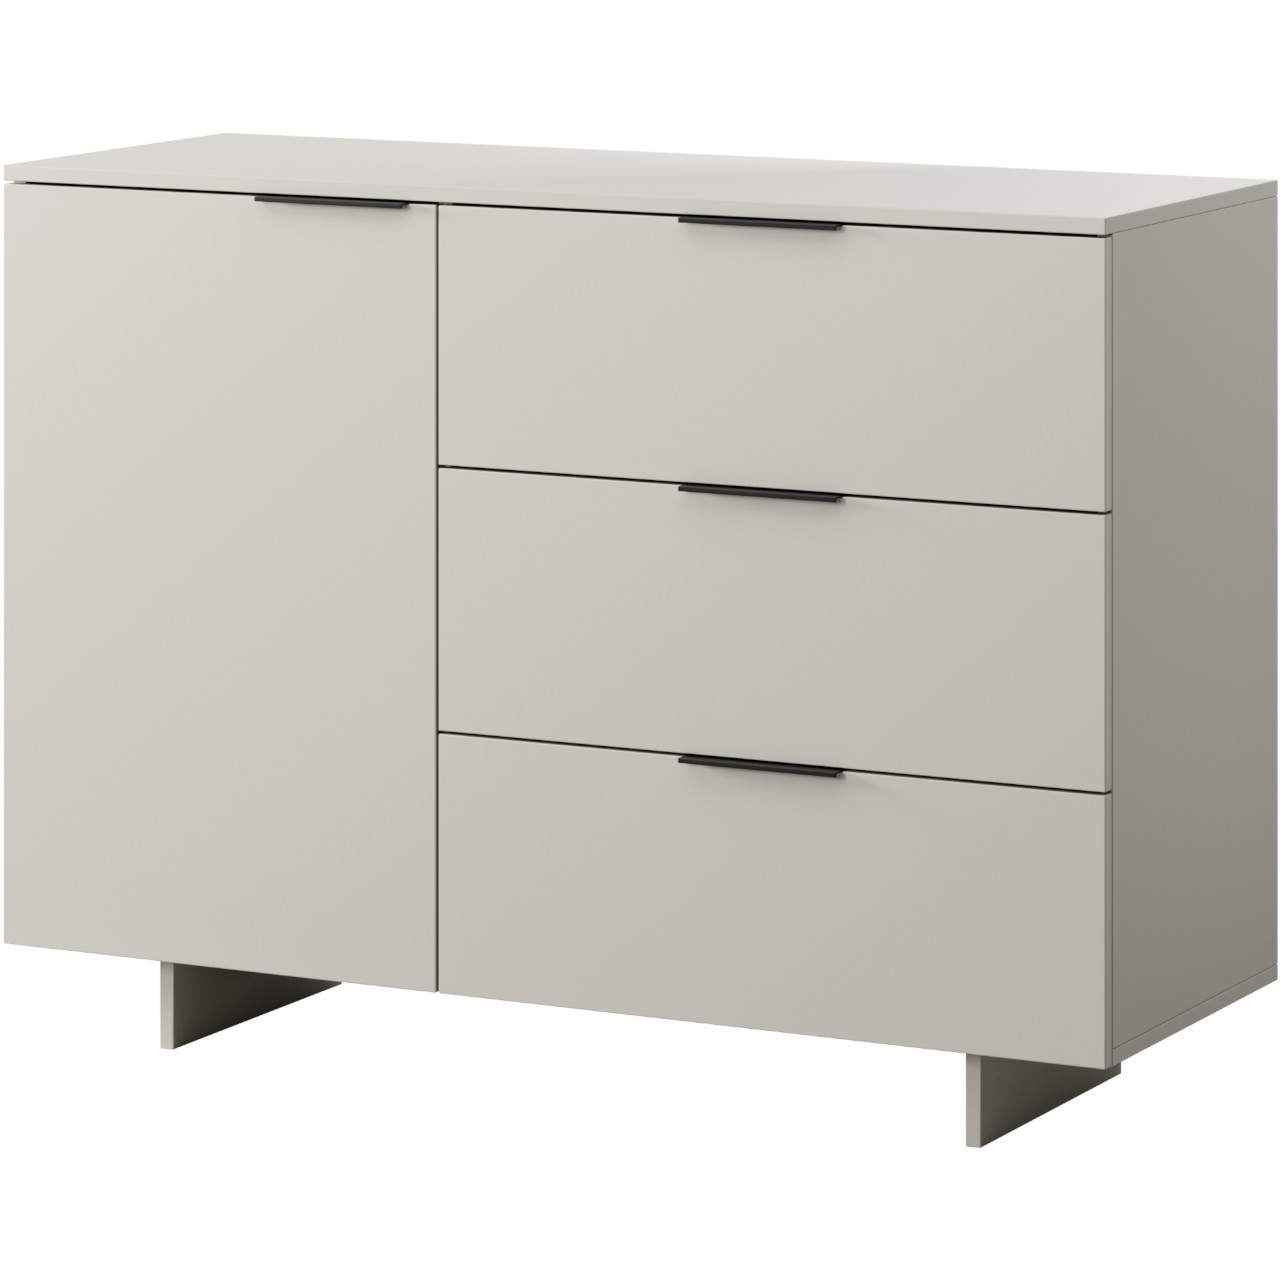 Chest of drawers MALMO 1D3S sand beige